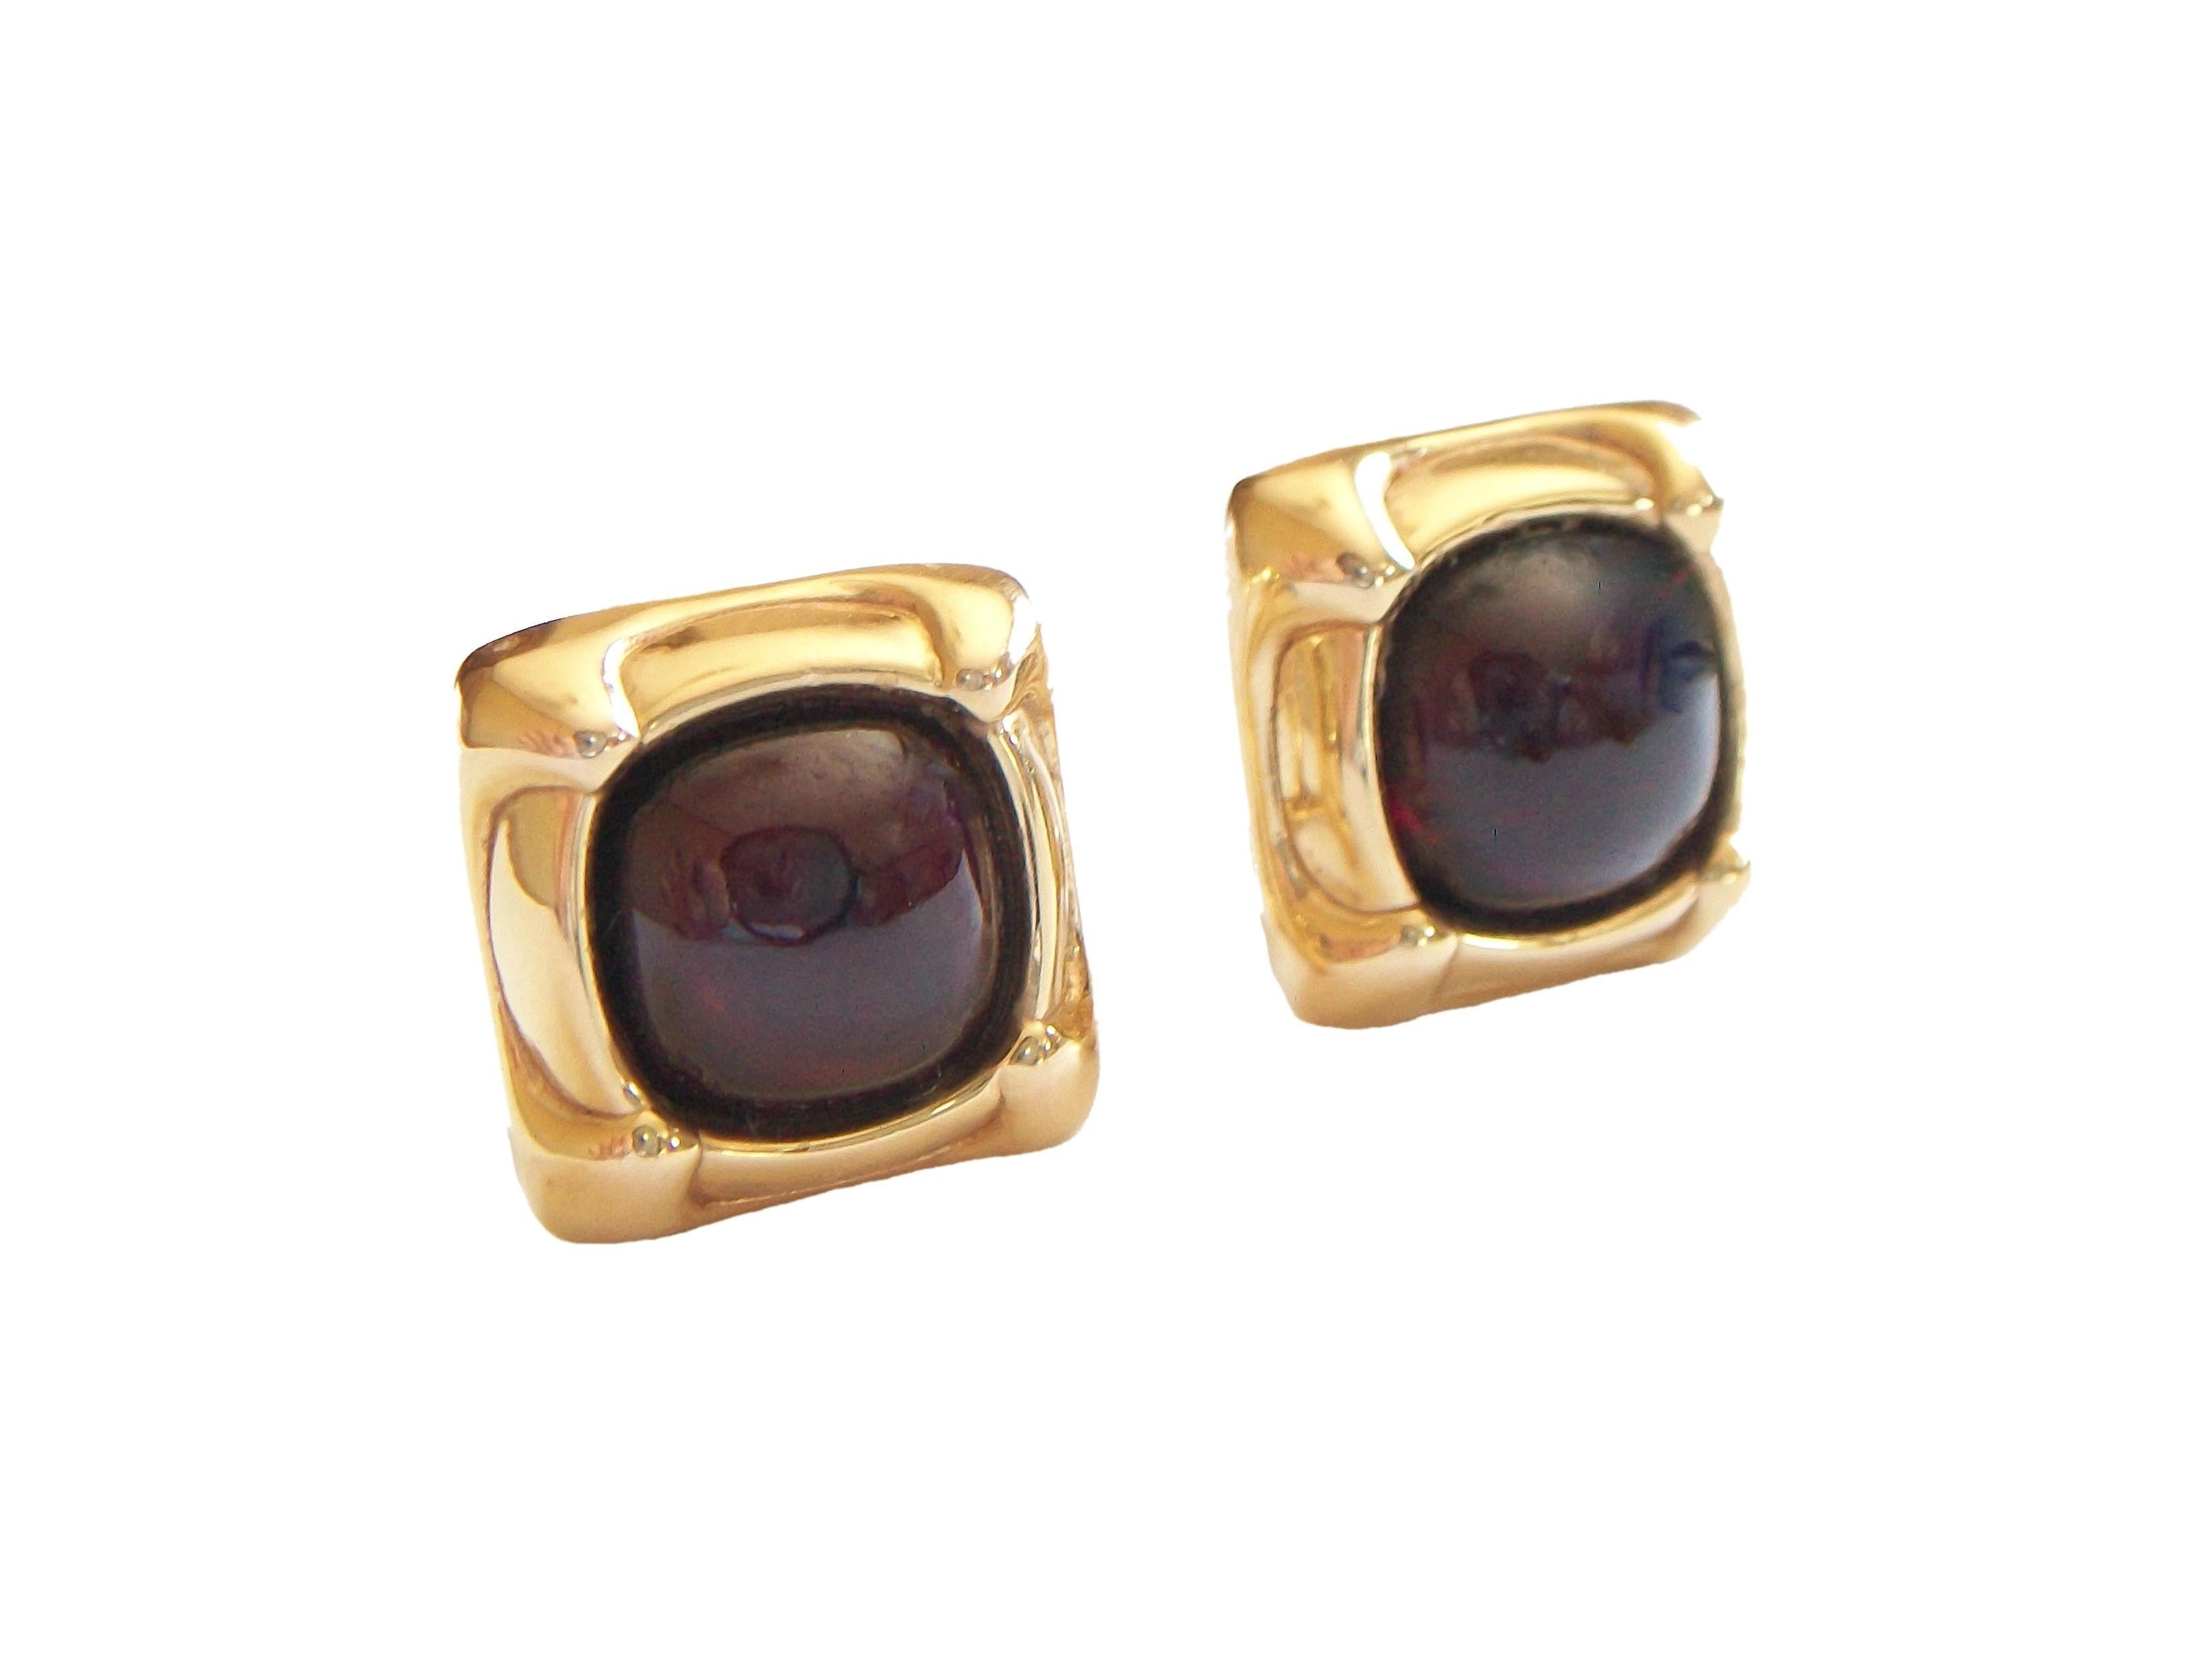 Vintage pair 18K / 750 yellow gold and cabochon garnet drop earrings - each garnet approximately 8.64 carats (10 mm. in diameter) - finest quality workmanship and detail - hand made - omega backs - each marked 750 along with maker's mark BTS